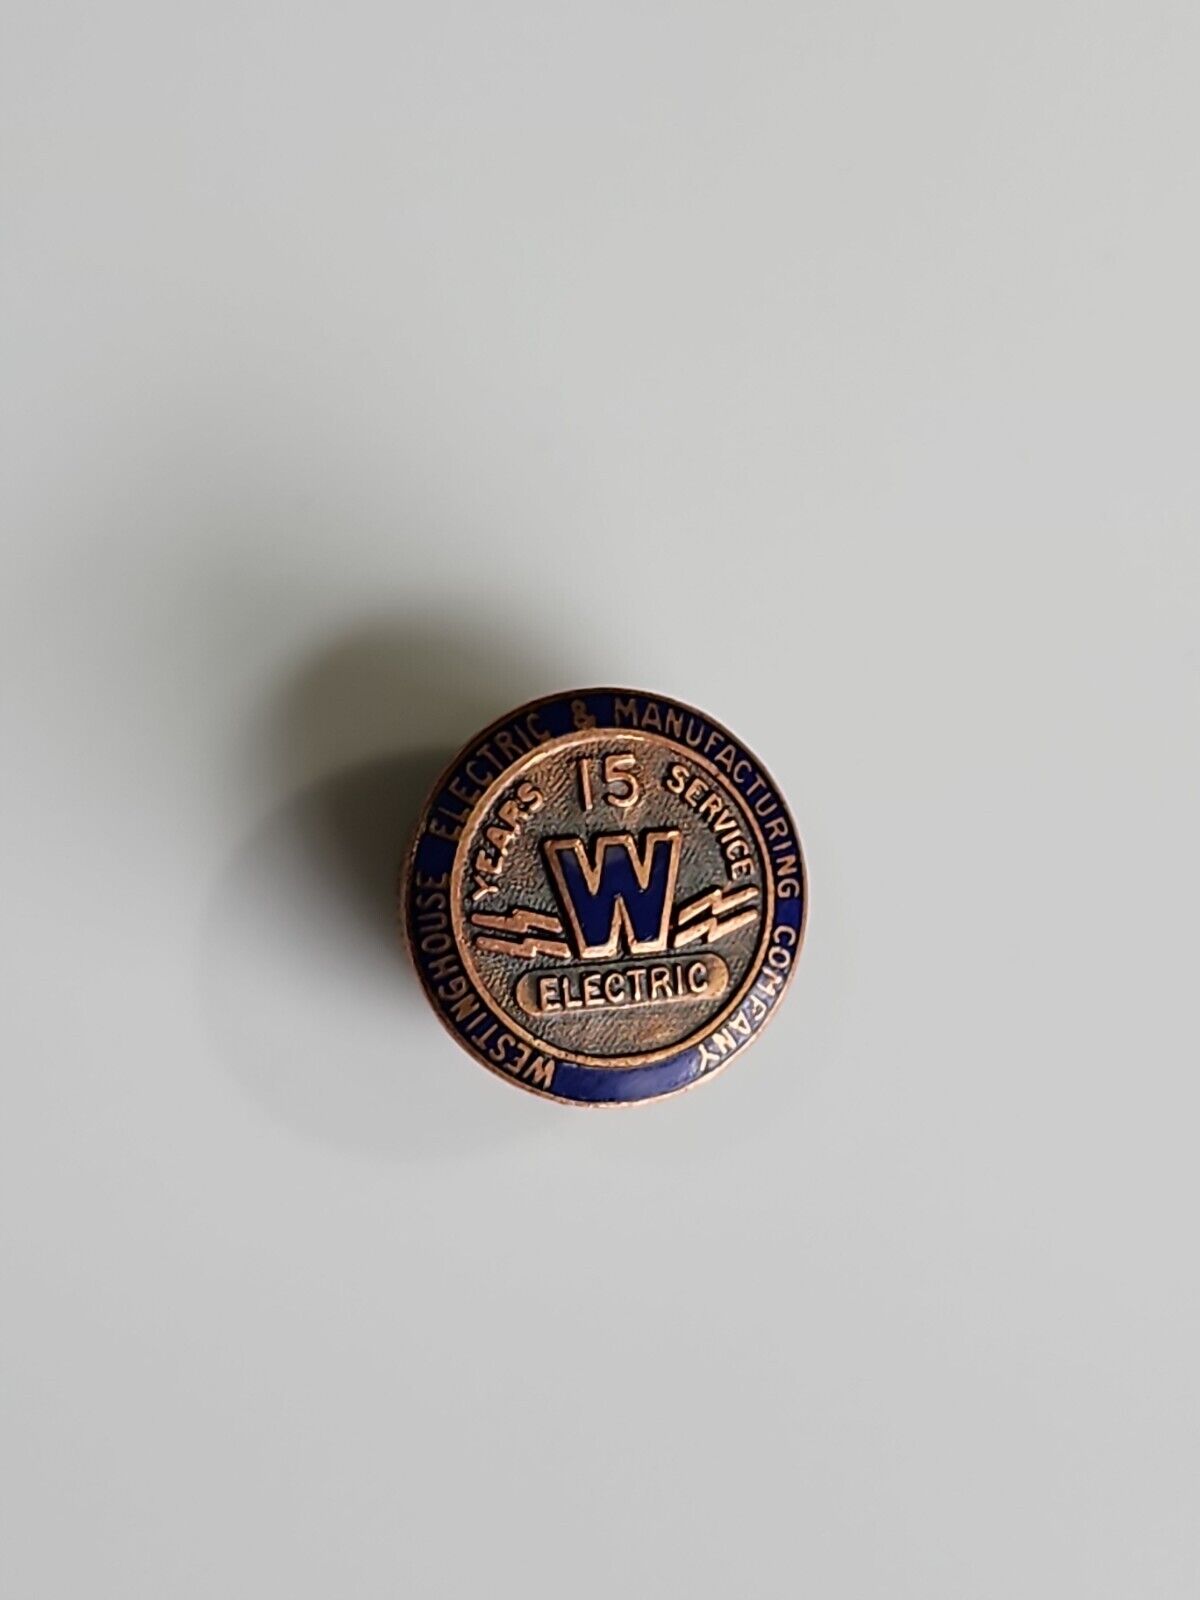 Westinghouse Electric 15 Year Employee Service Award Pin Screw-Back Vintage